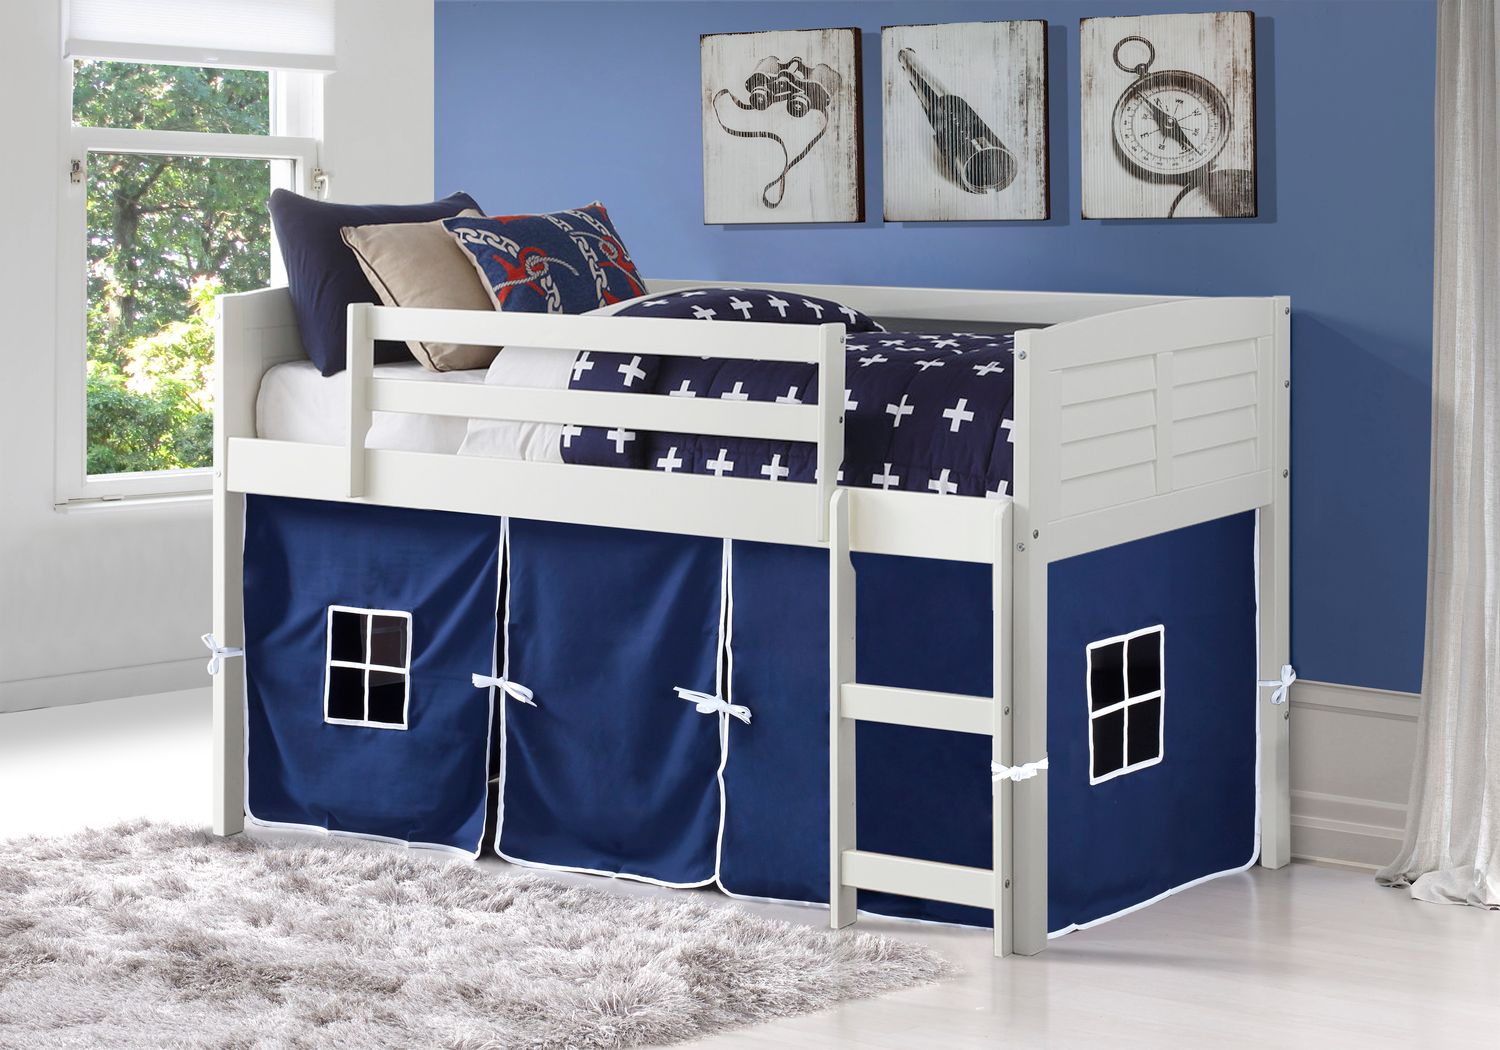 Rooms To Go Kids Furniture, Bunk Beds Rooms To Go Kids